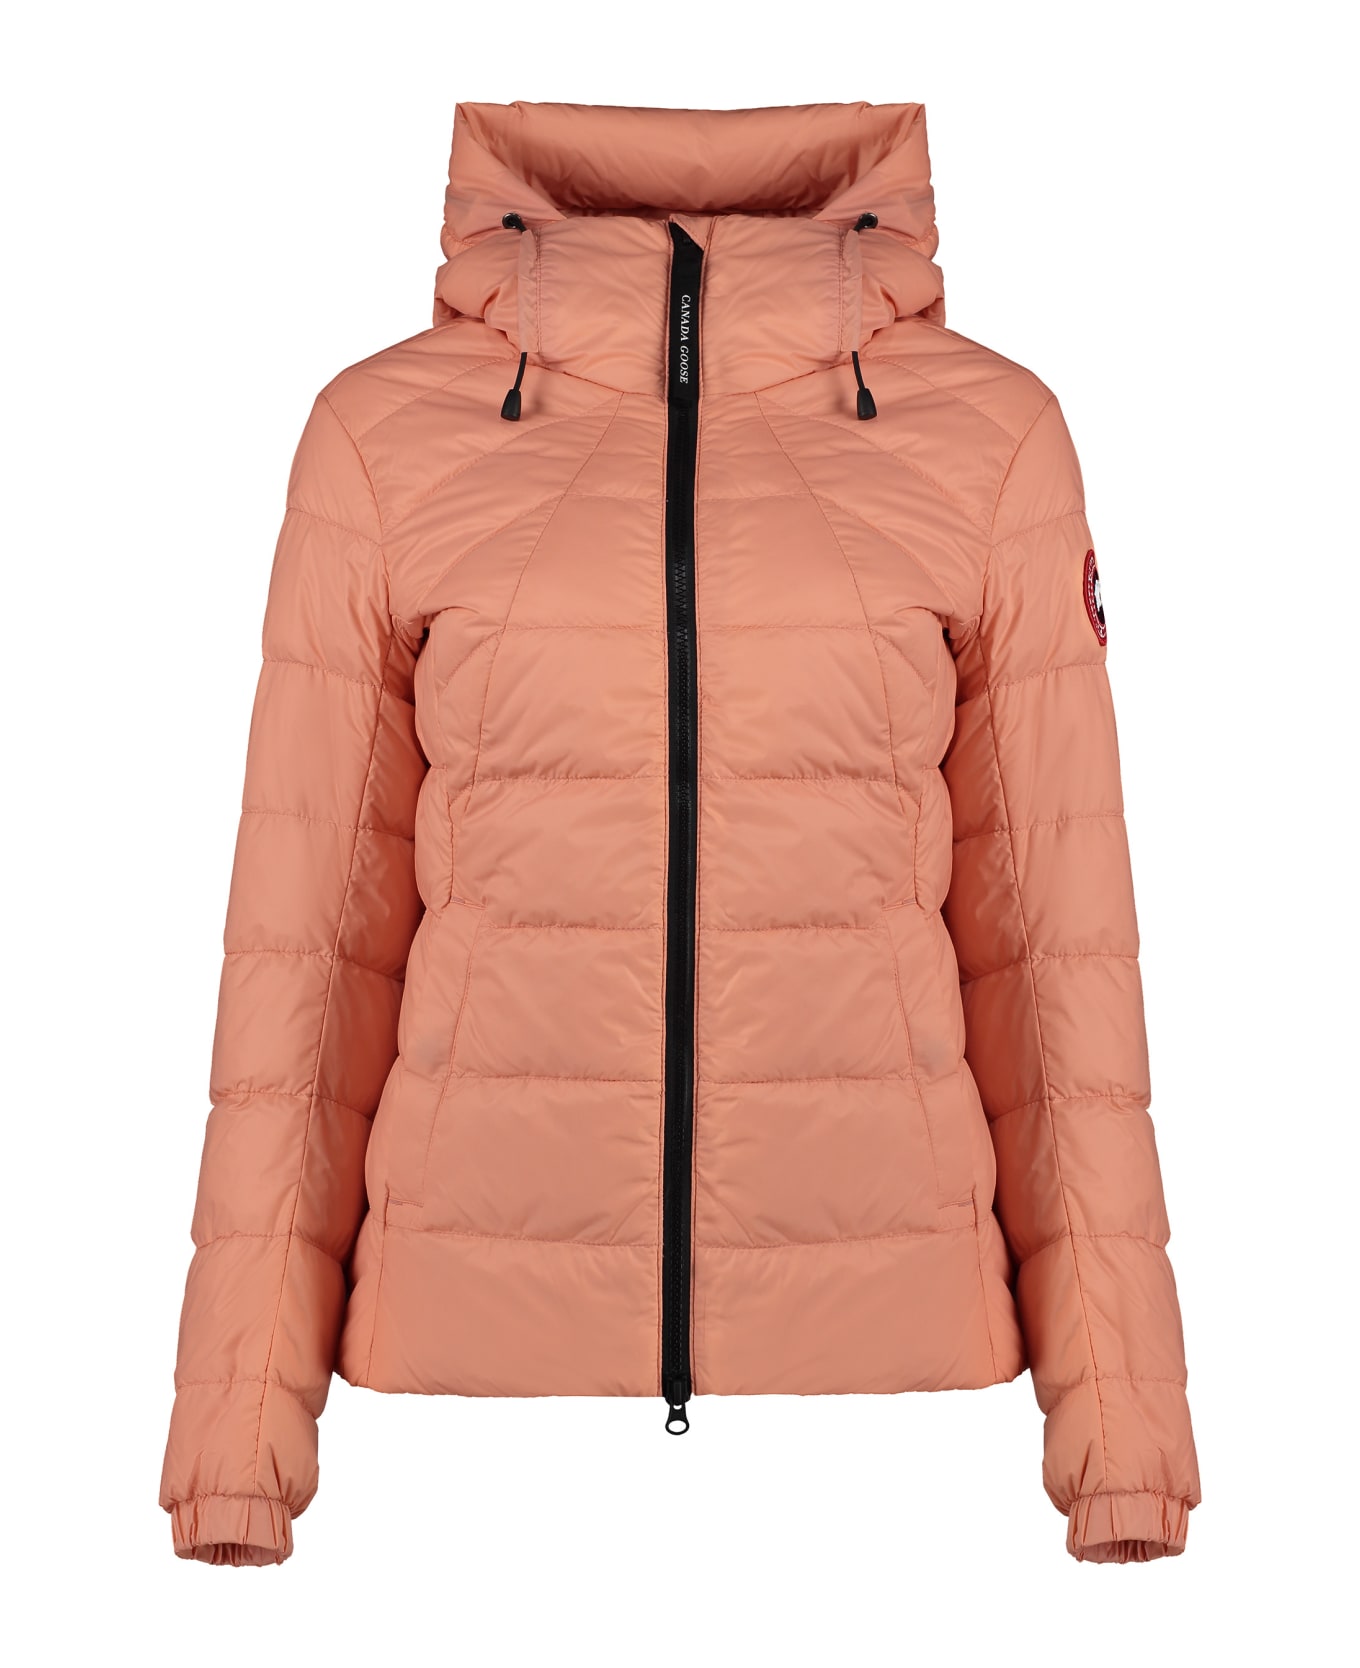 Canada Goose Abbott Hooded Techno Fabric Down Jacket - Salmon pink